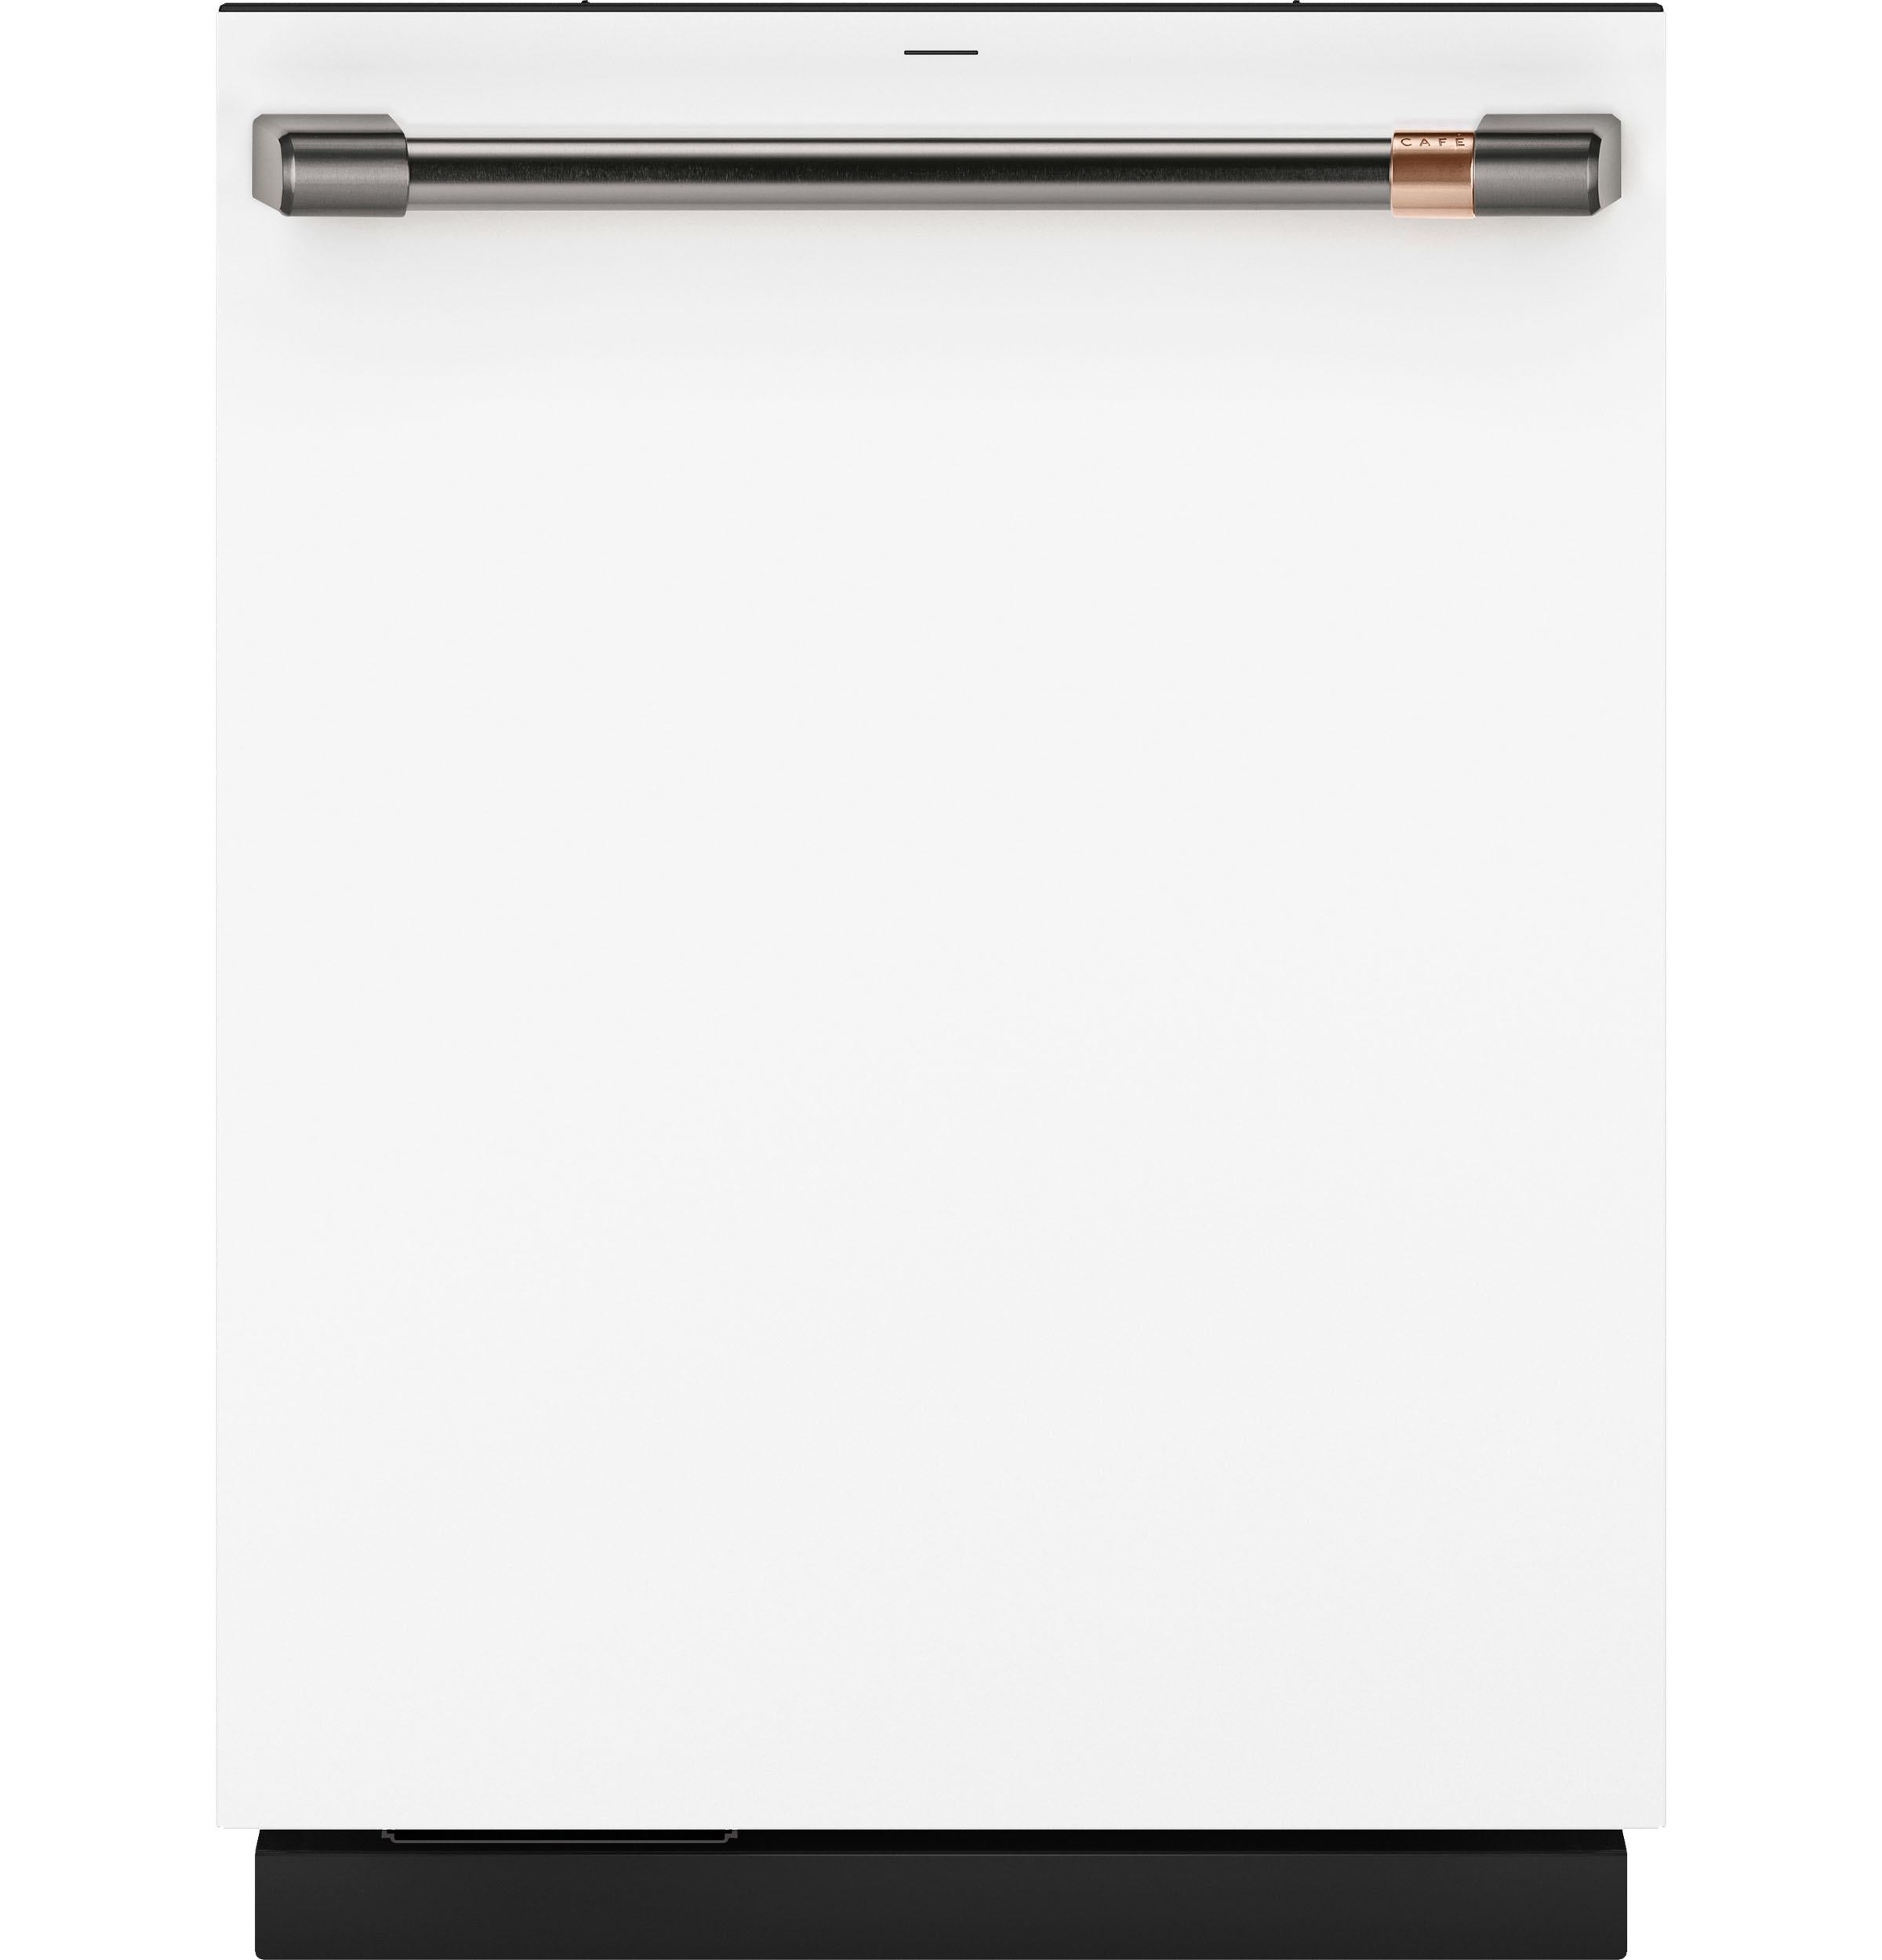 Cafe Caf(eback)? CustomFit ENERGY STAR Stainless Interior Smart Dishwasher with Ultra Wash Top Rack and Dual Convection Ultra Dry, LED Lights, 39 dBA